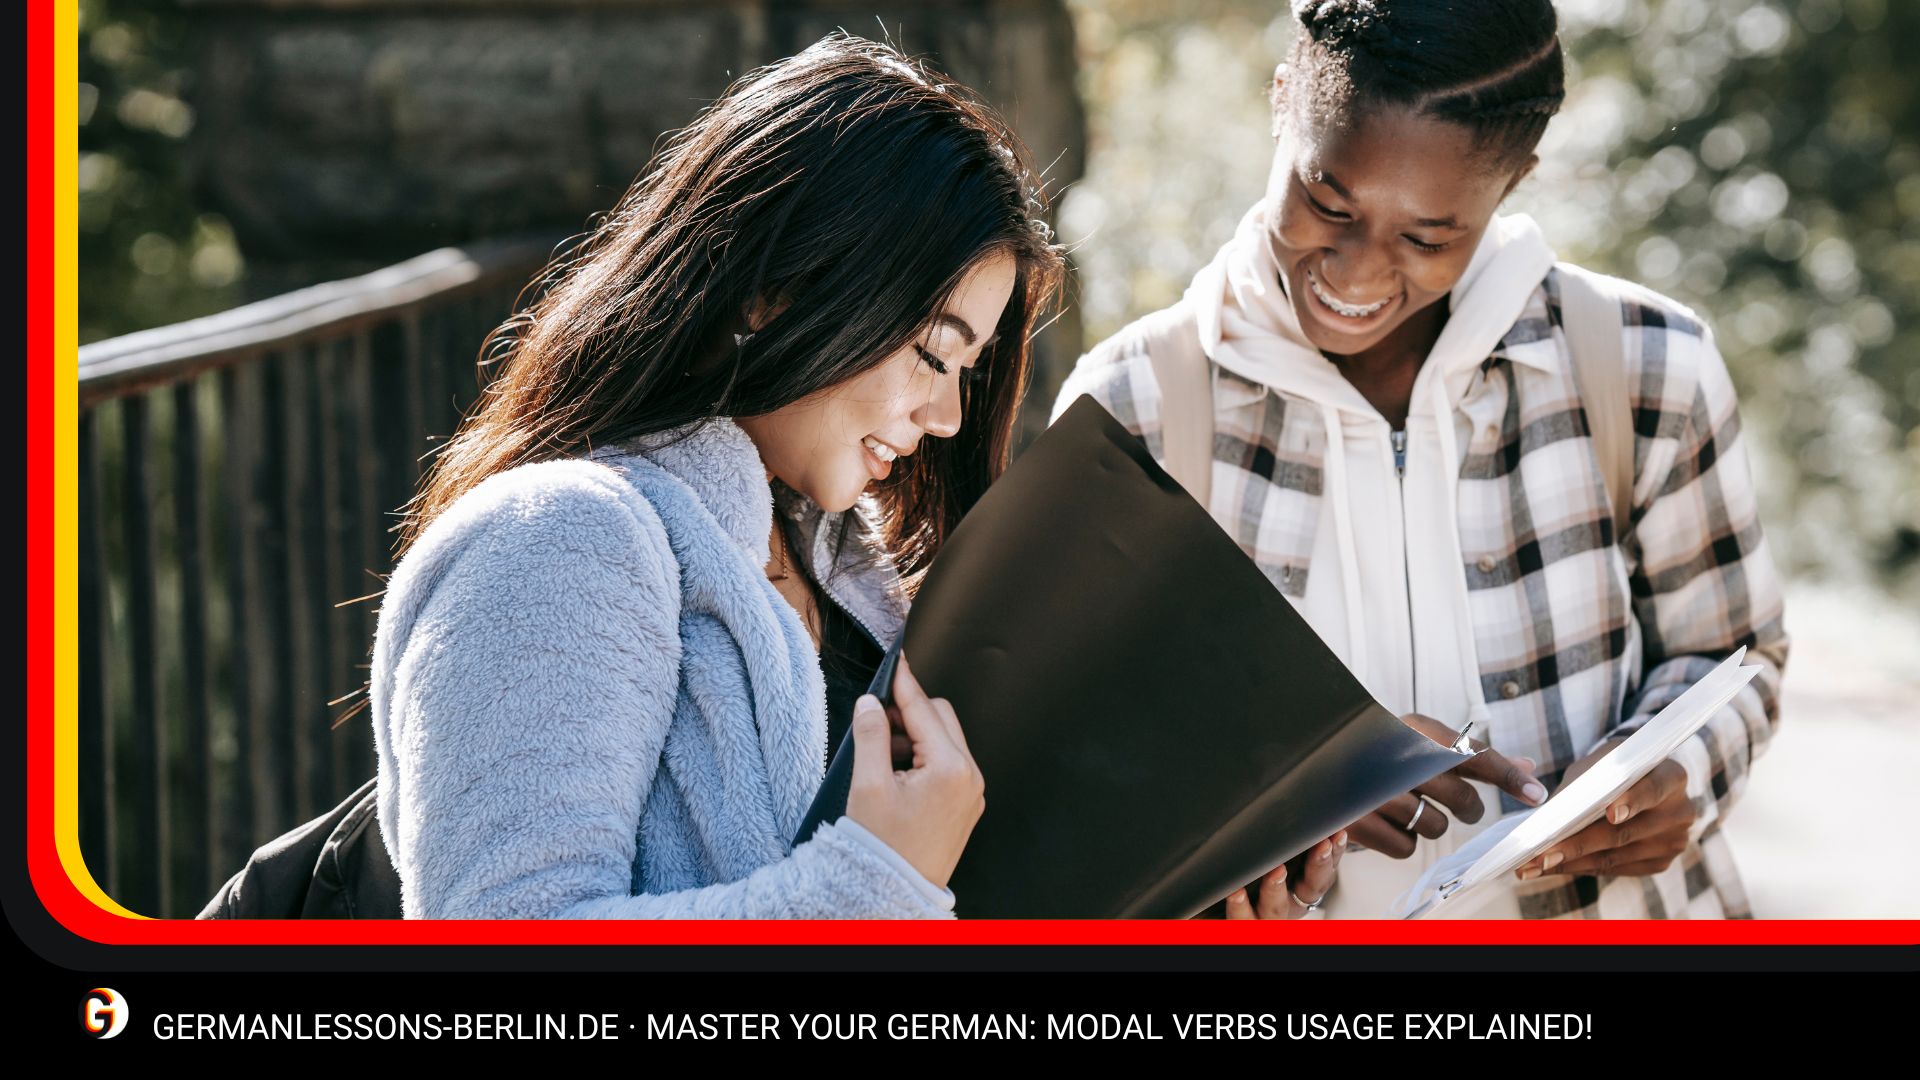 Master Your German: Modal Verbs Usage Explained!